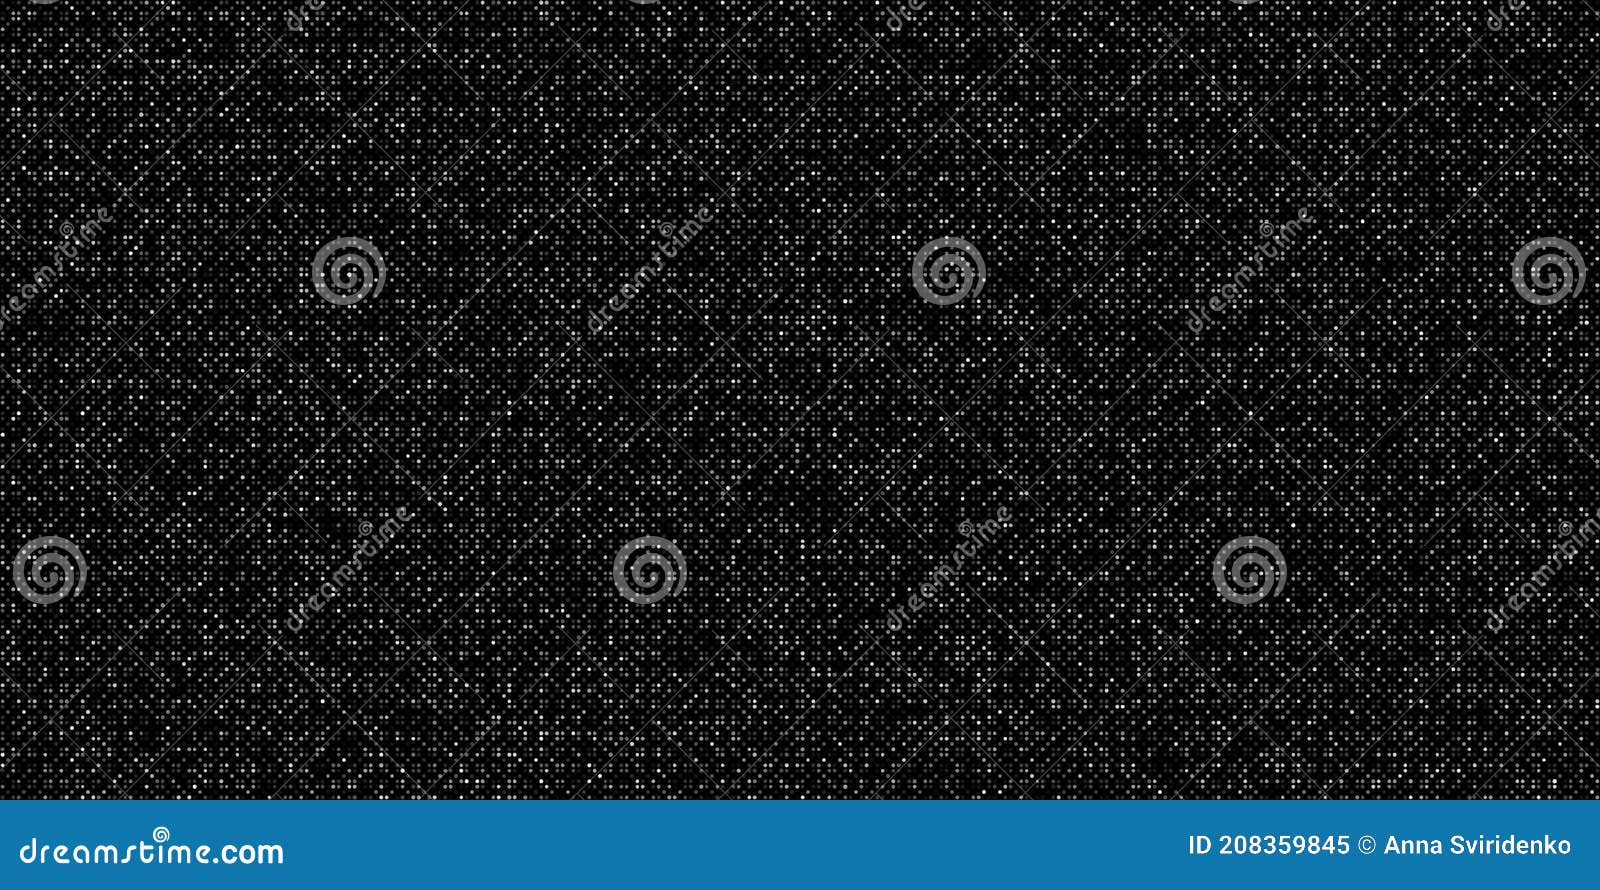 Dark Geometric Grid Background Modern Abstract Noise Texture Stock ...